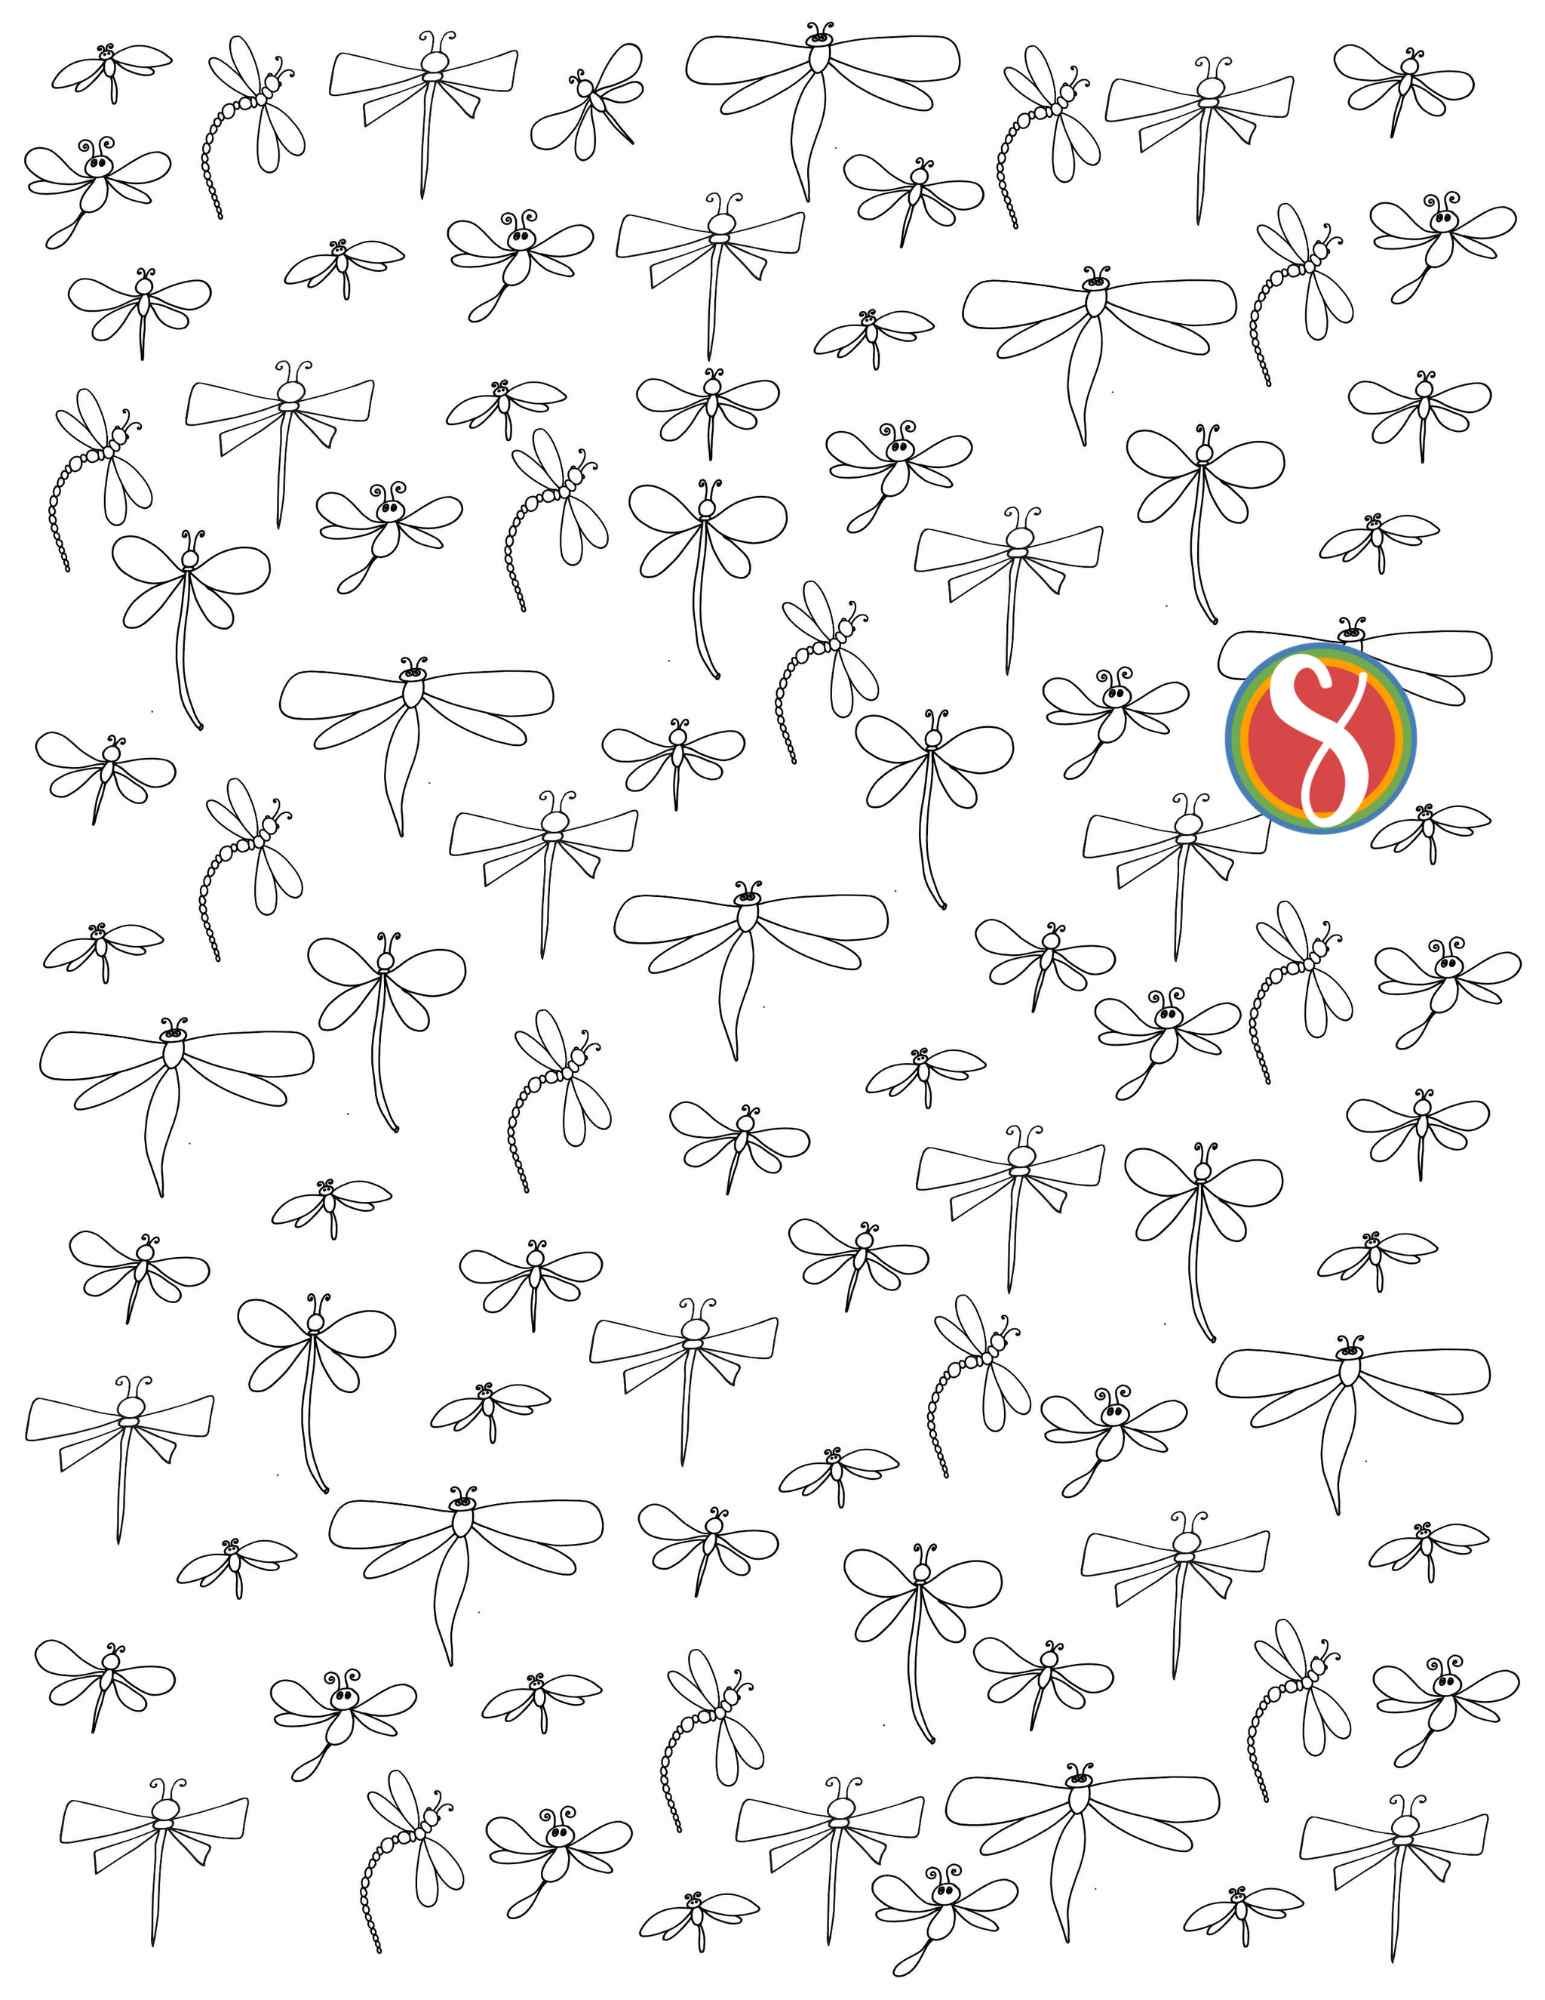 dragonfly coloring pages with lots of tiny dragonflies